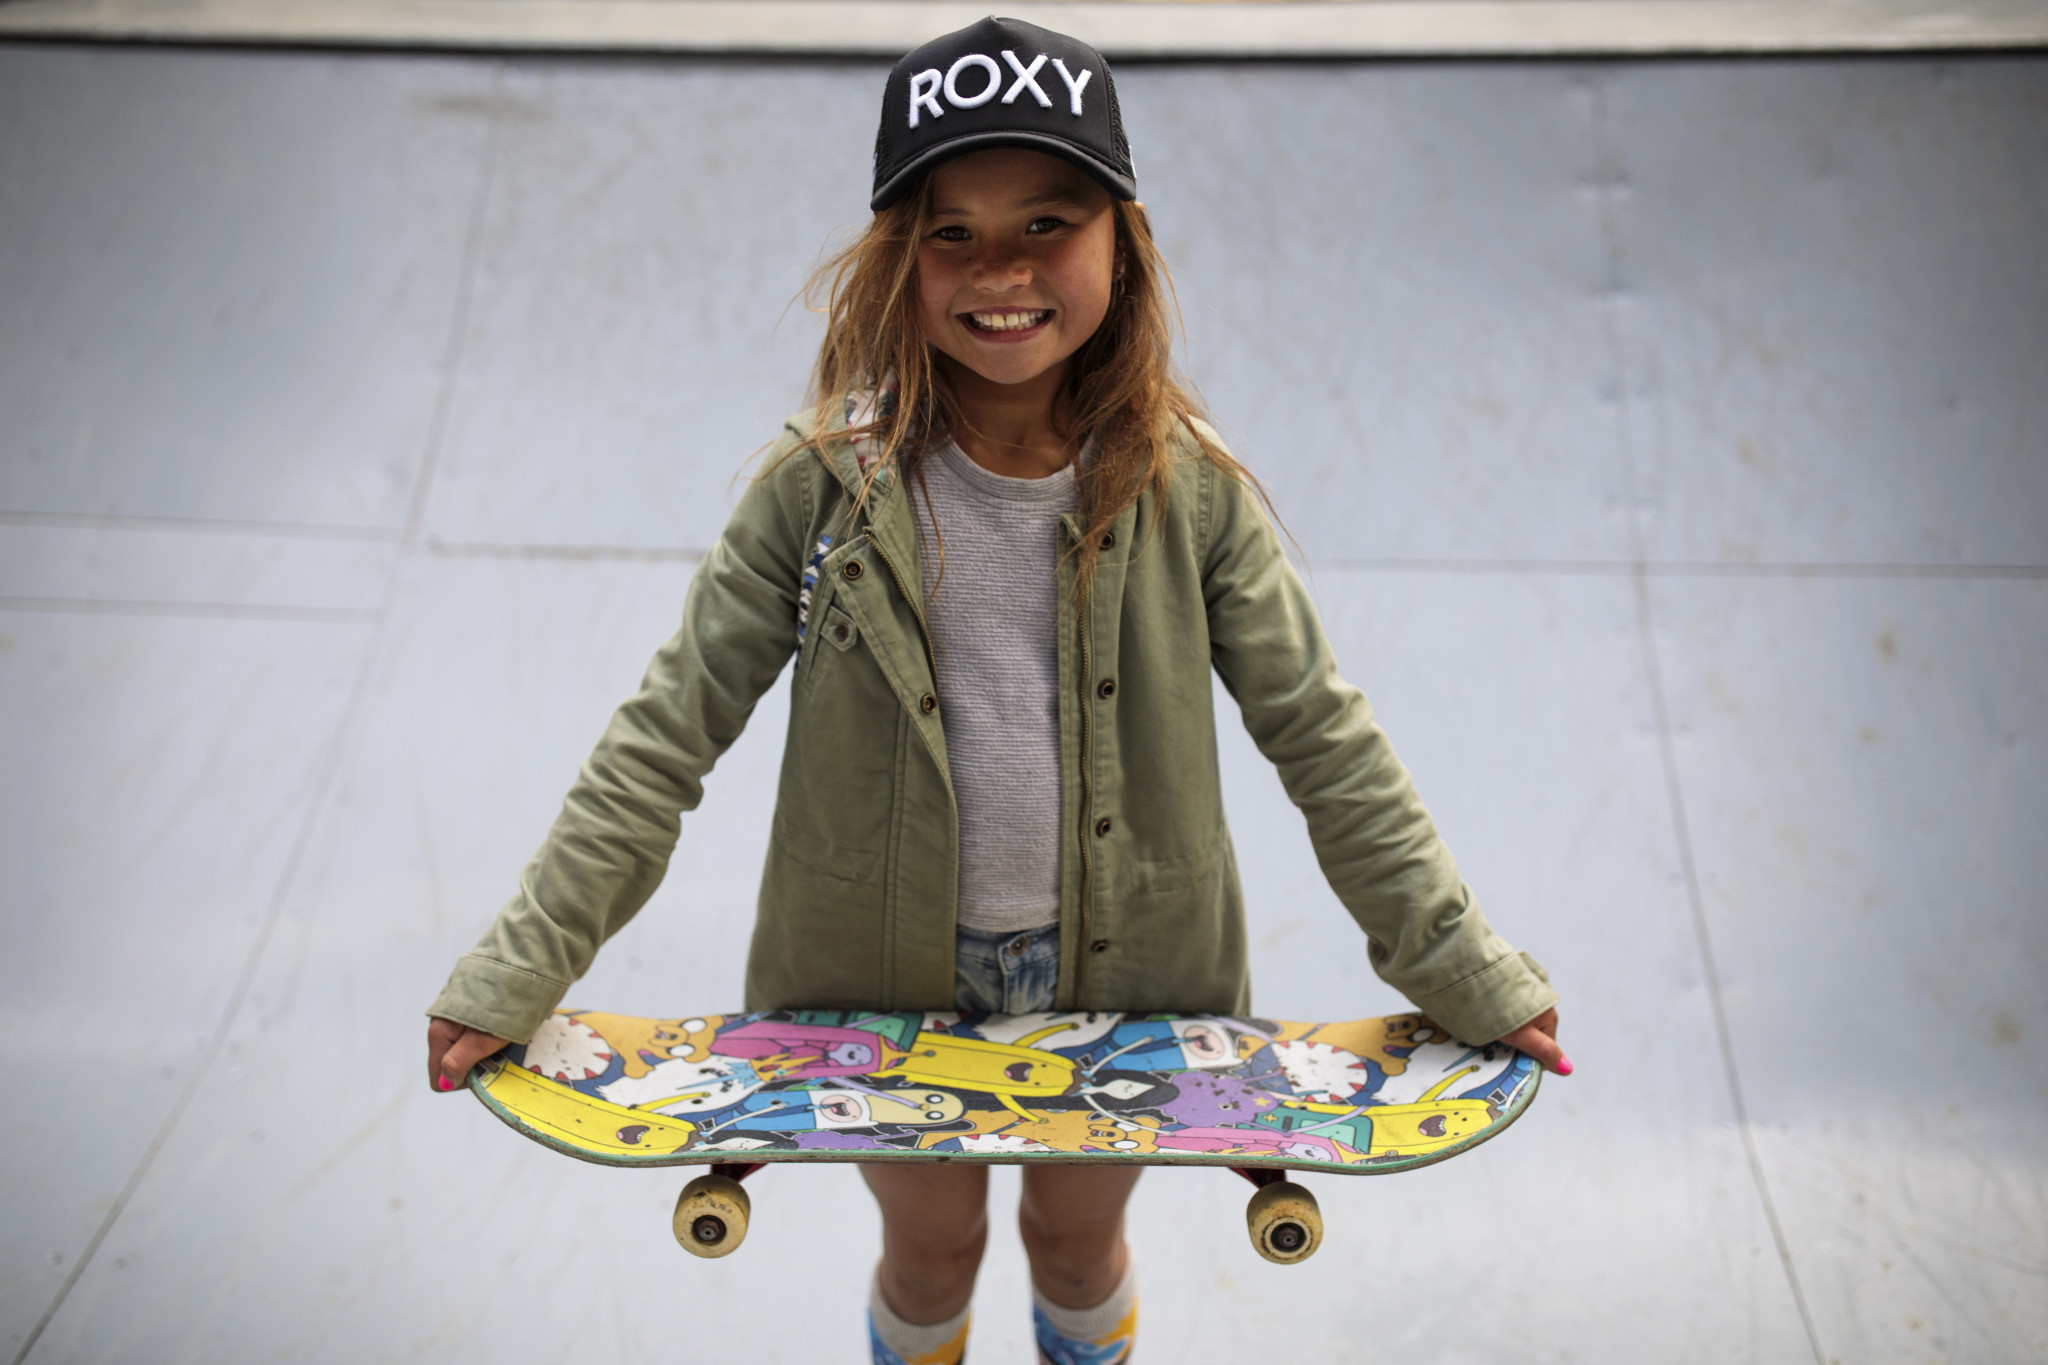 Ten-year-old skateboarder gets further boost in bid for Tokyo 2020 place